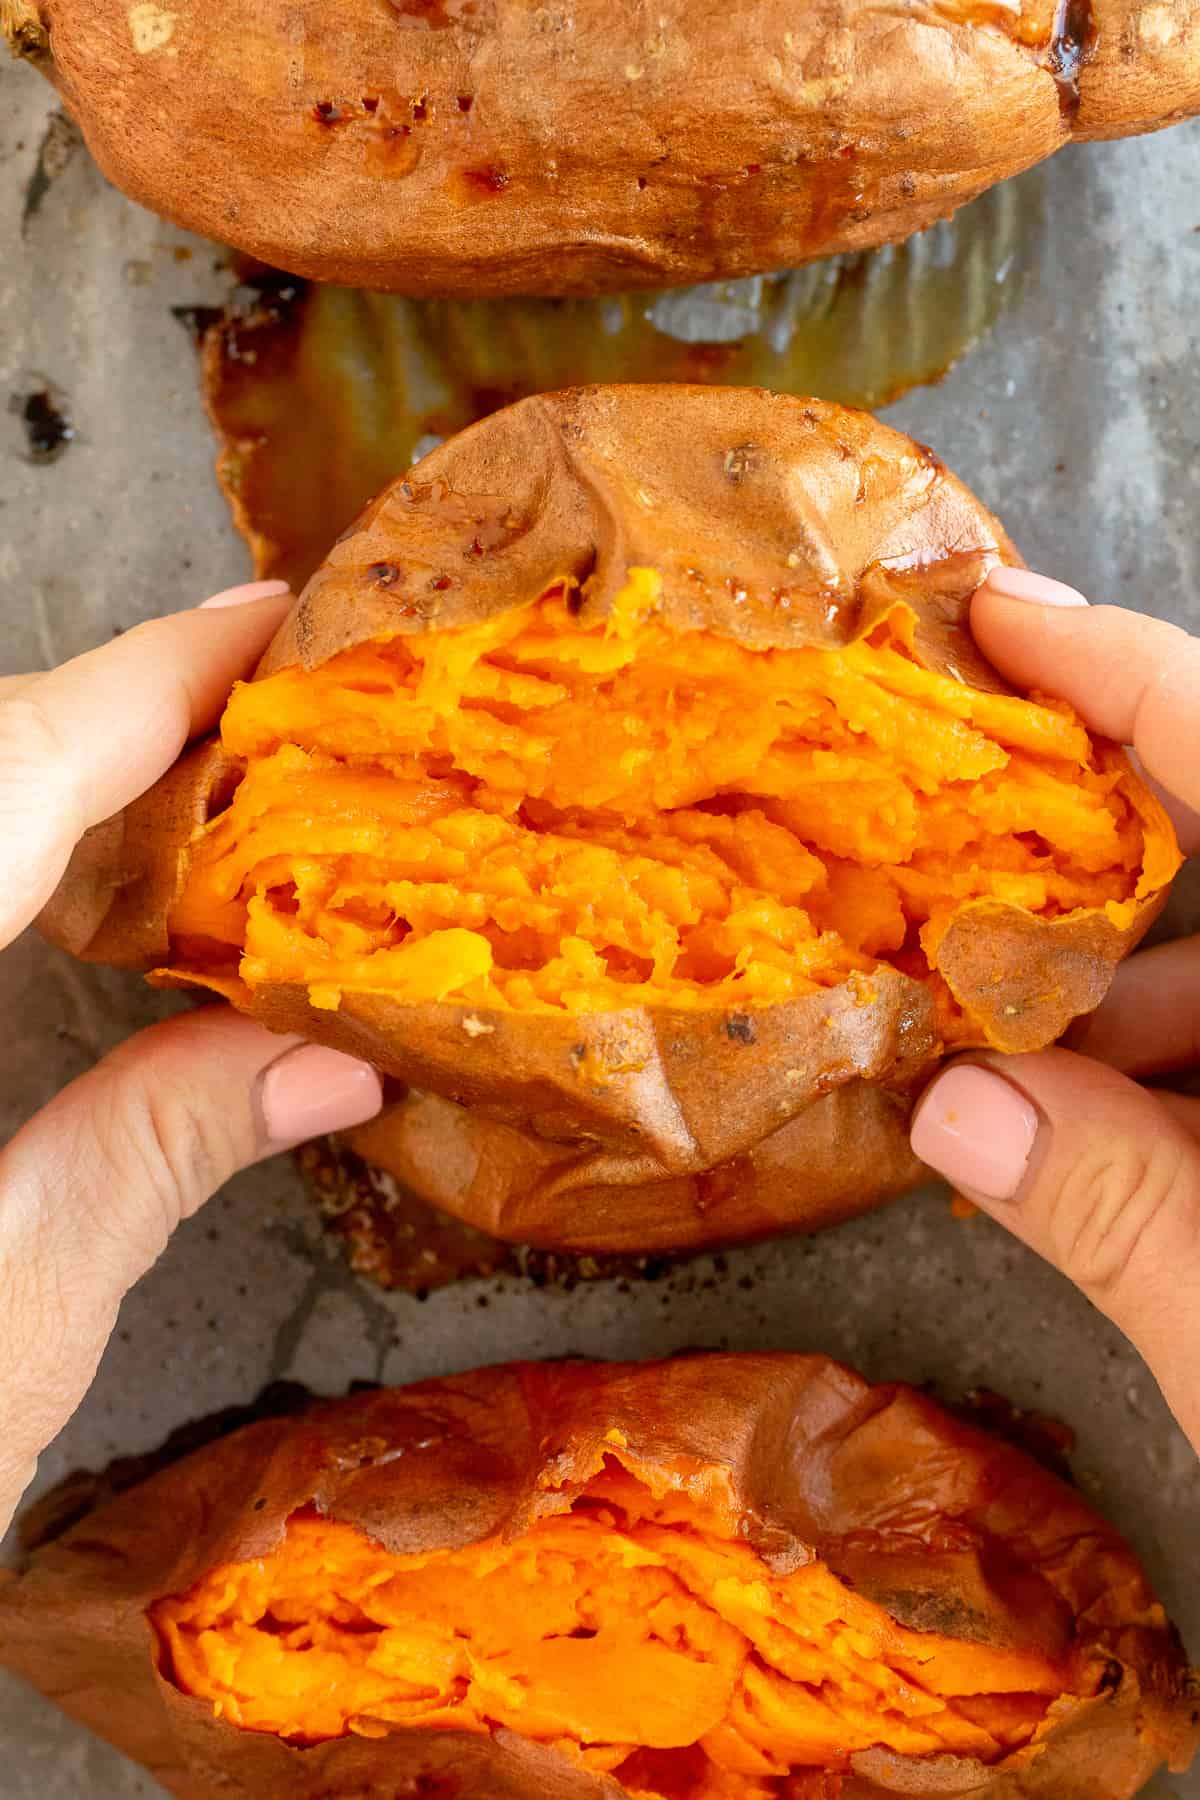 Hands squeeze the ends of a sweet potato to open it up.